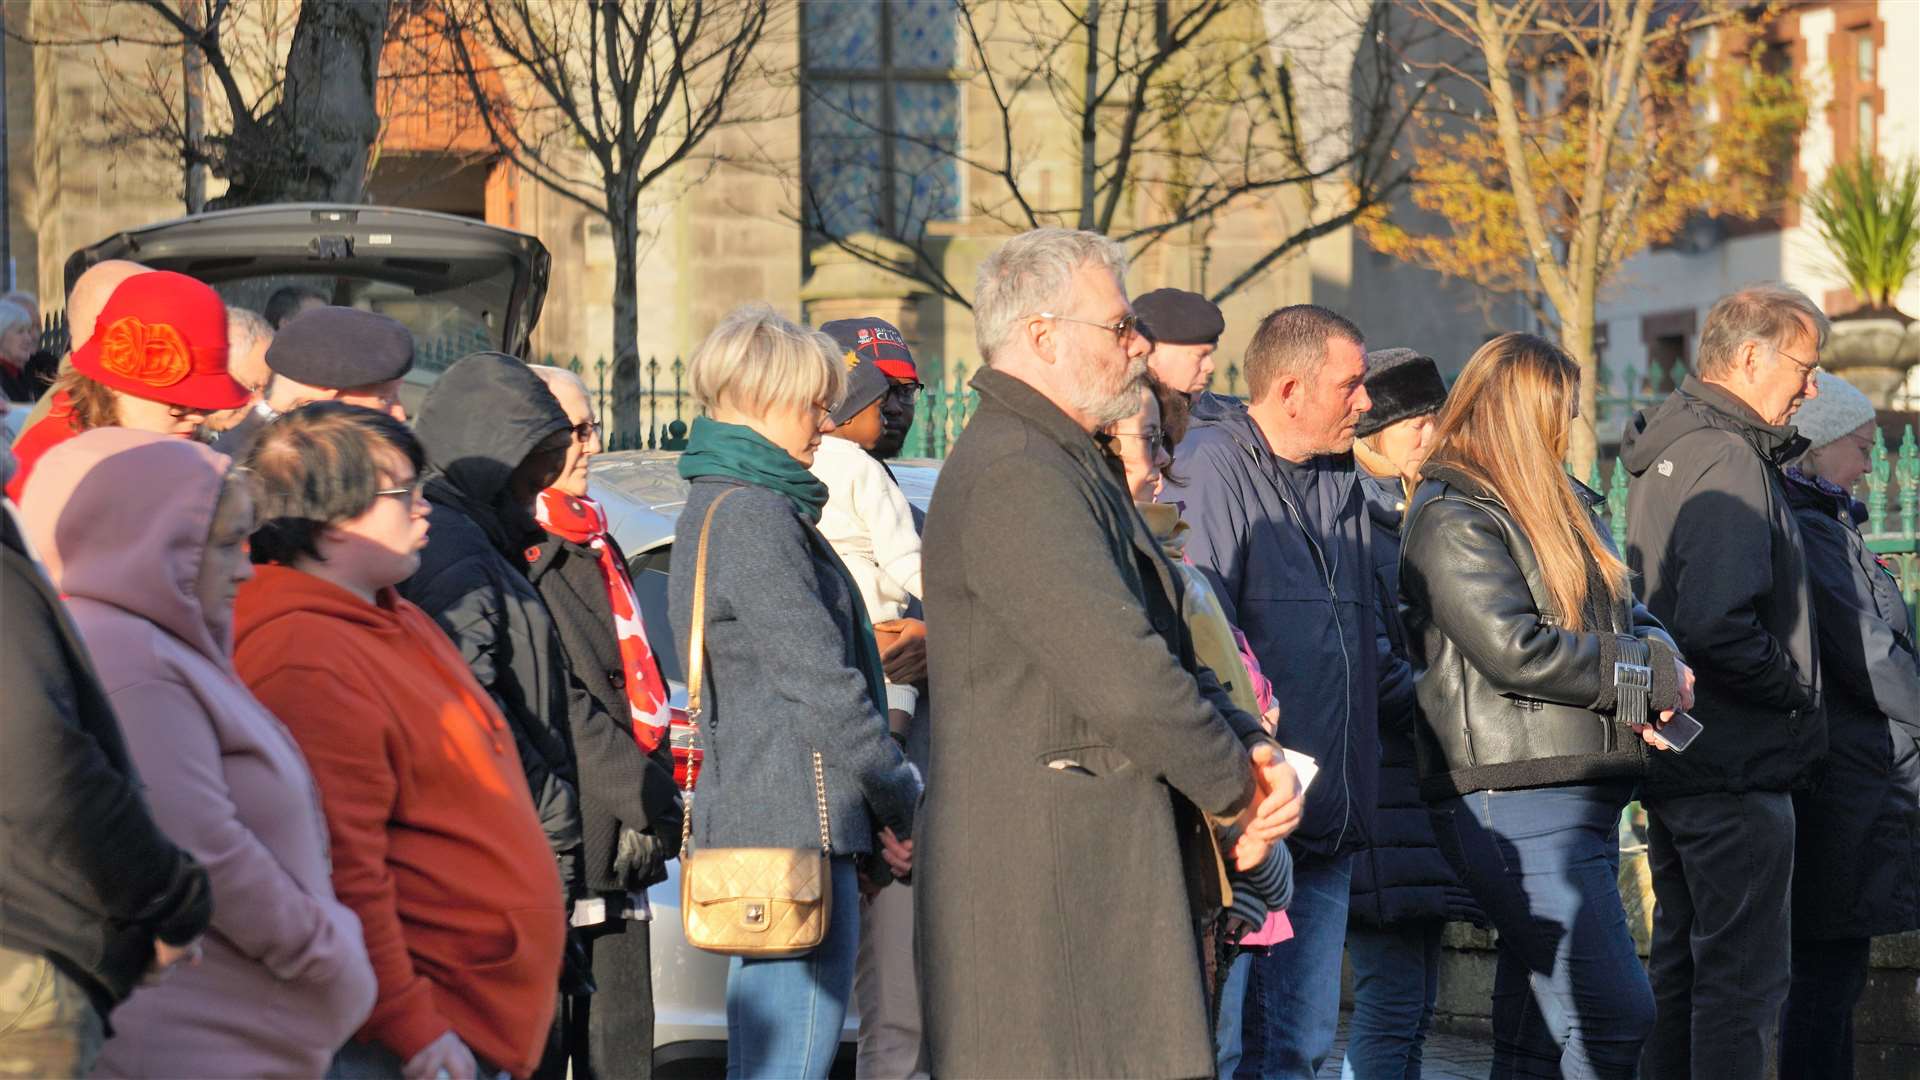 Members of the public at the Sunday morning event. Picture: DGS